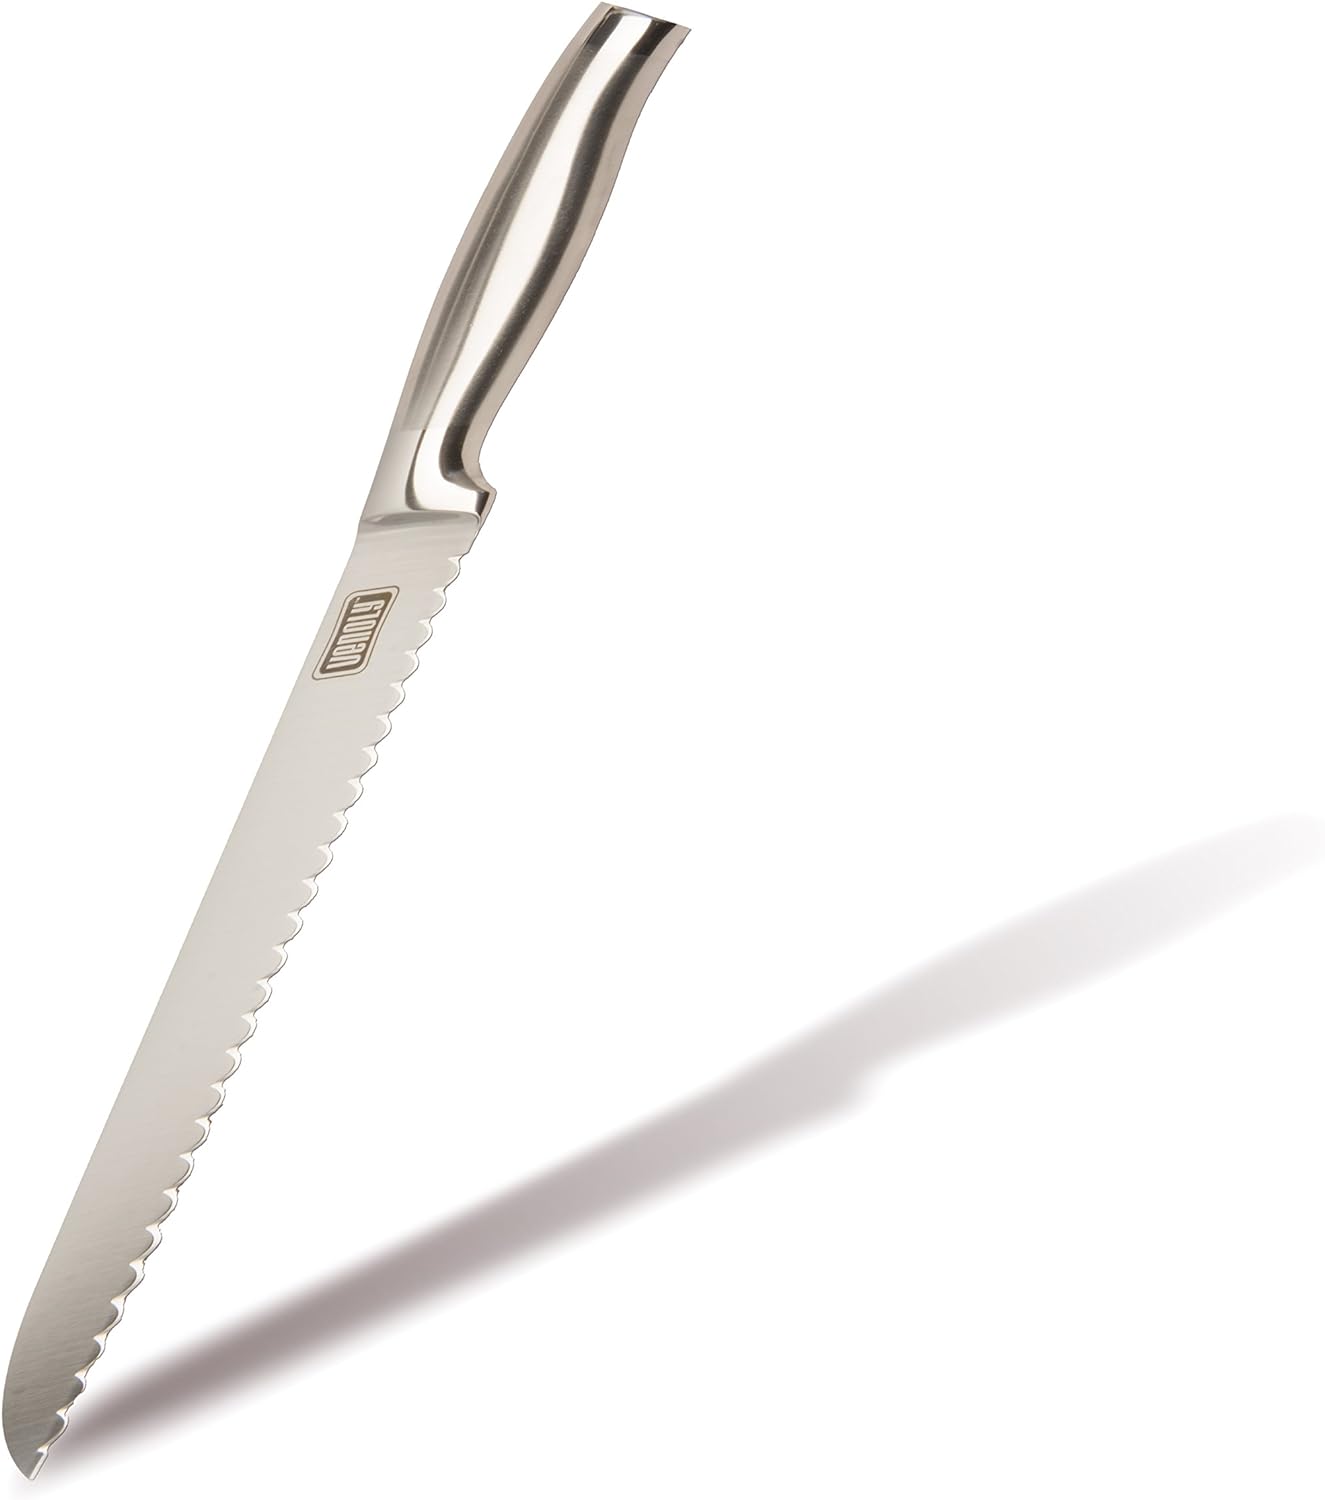 8 Inch Serrated Bread Knife for Sale in USA 